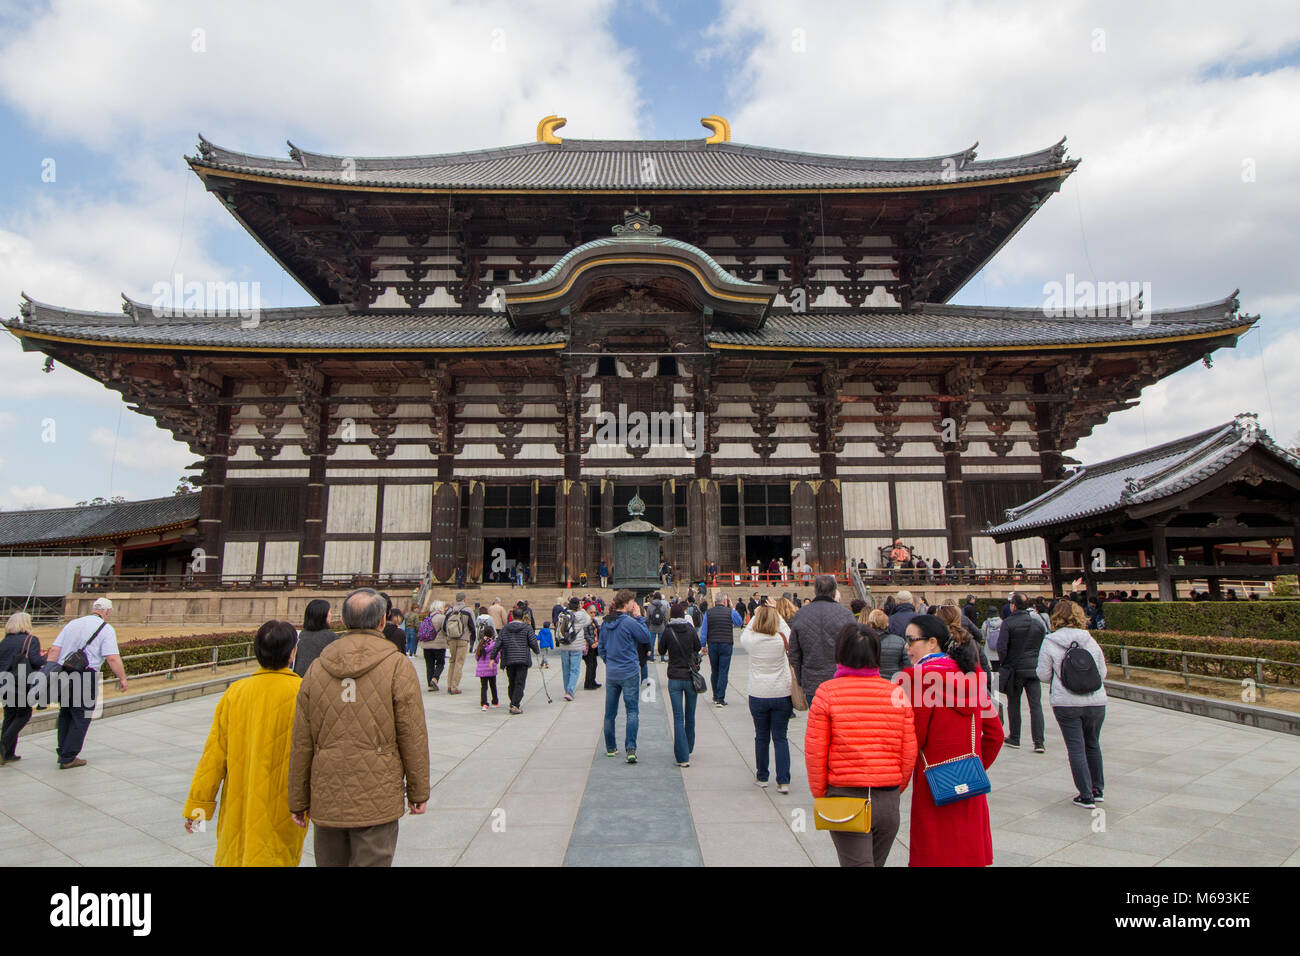 Daibutsuden, the world's largest wooden building. Tōdai-ji is a Buddhist temple complex, located in the city of Nara, Japan. Stock Photo